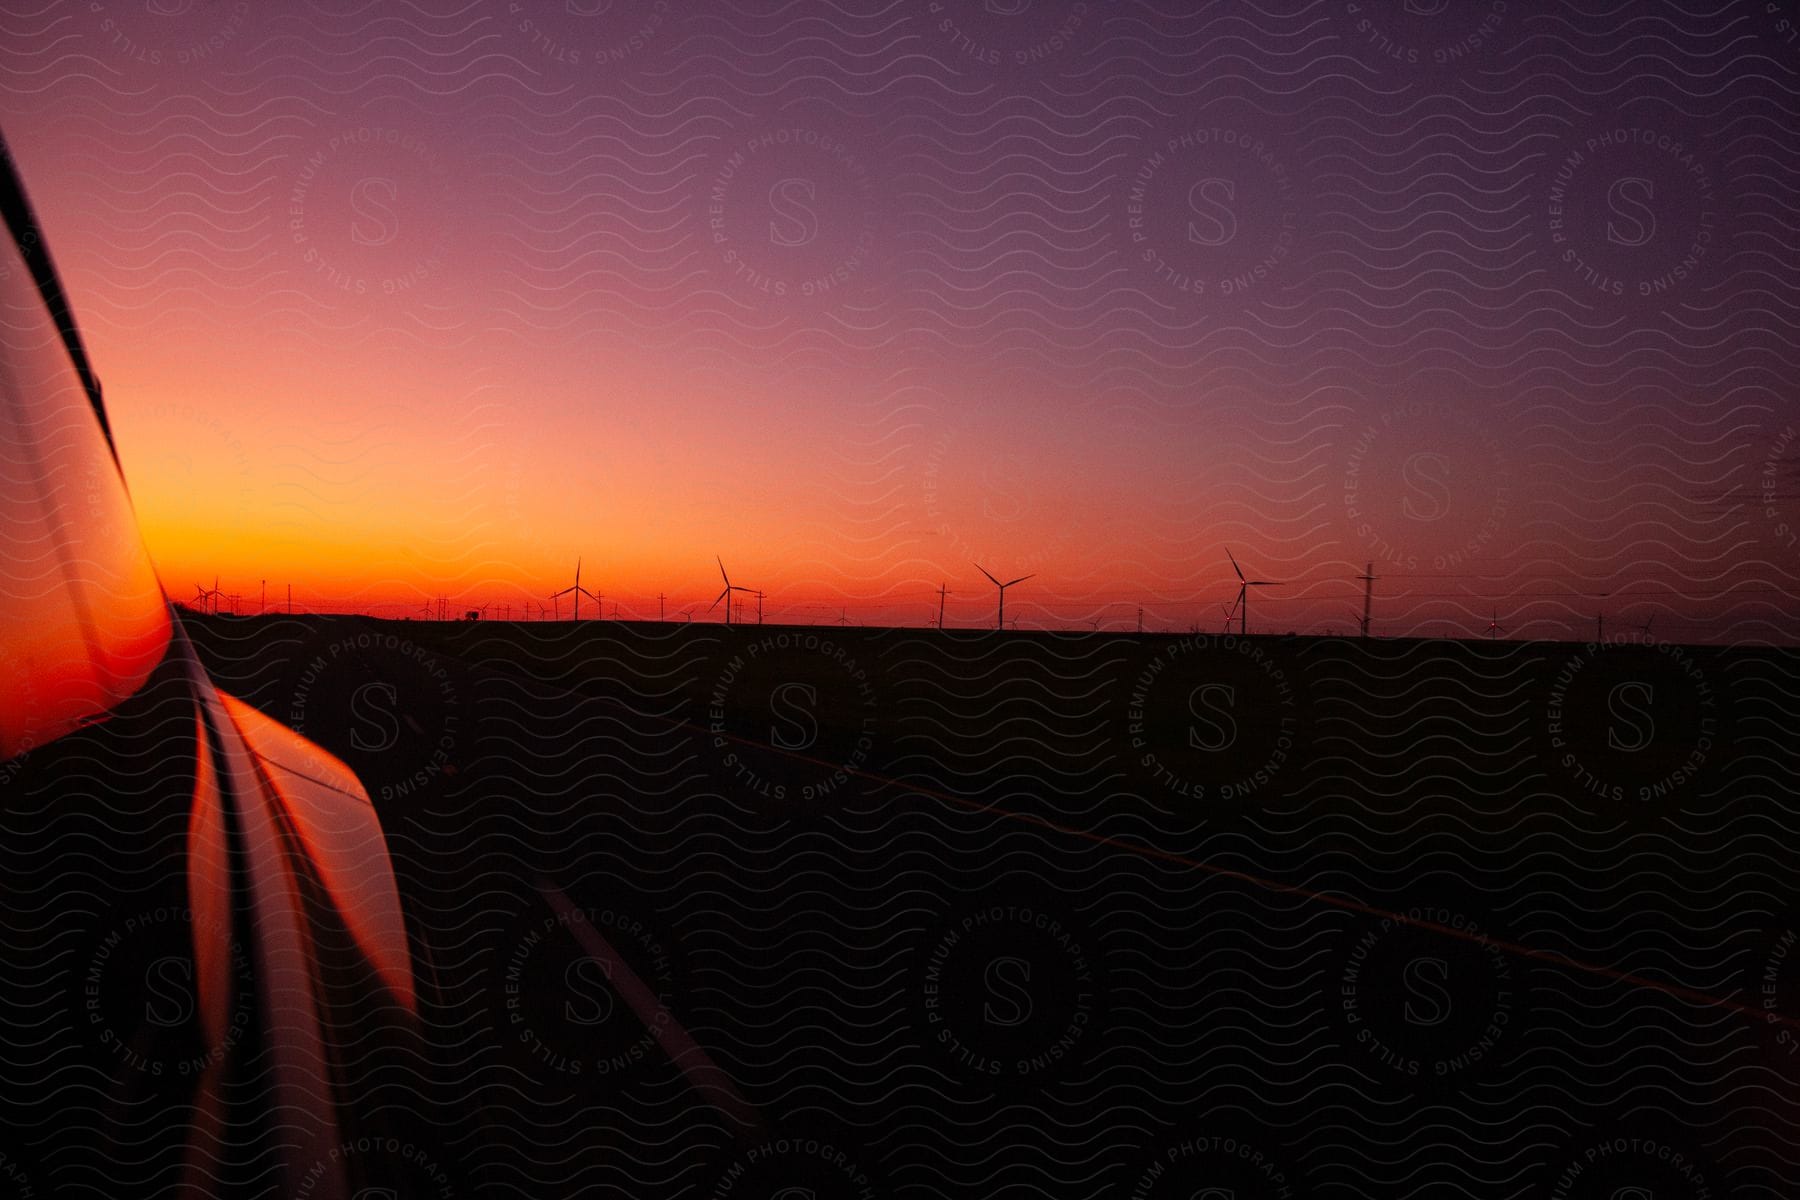 Wind turbines stand in the distance under a red sunset sky